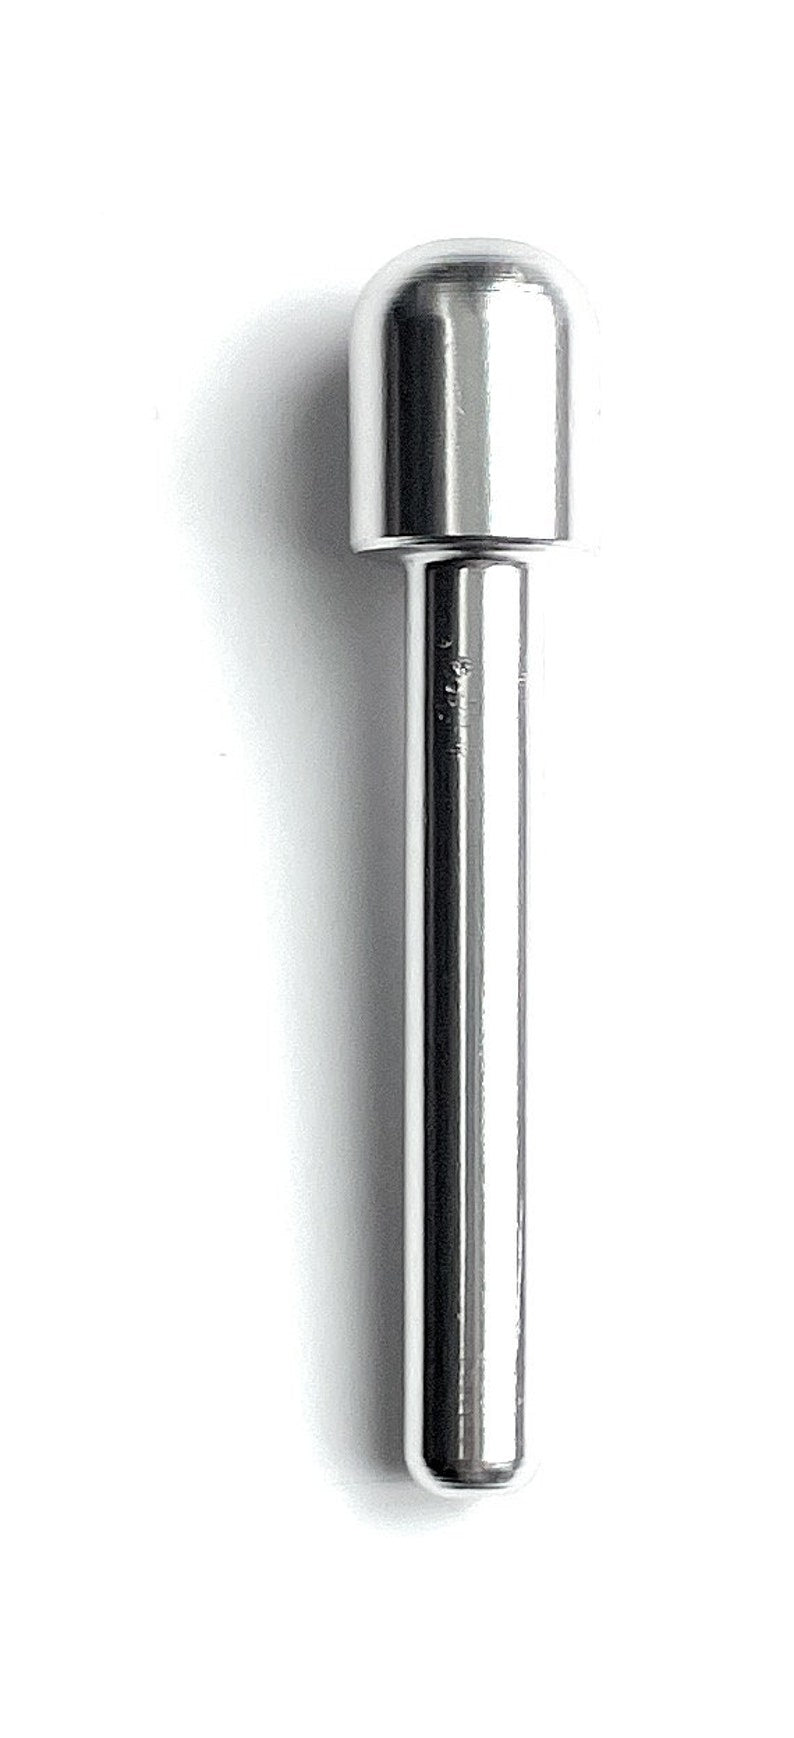 1 x tube made of aluminum - for your snuff - pull - tube - snuff - snorter dispenser - length 70mm (silver)